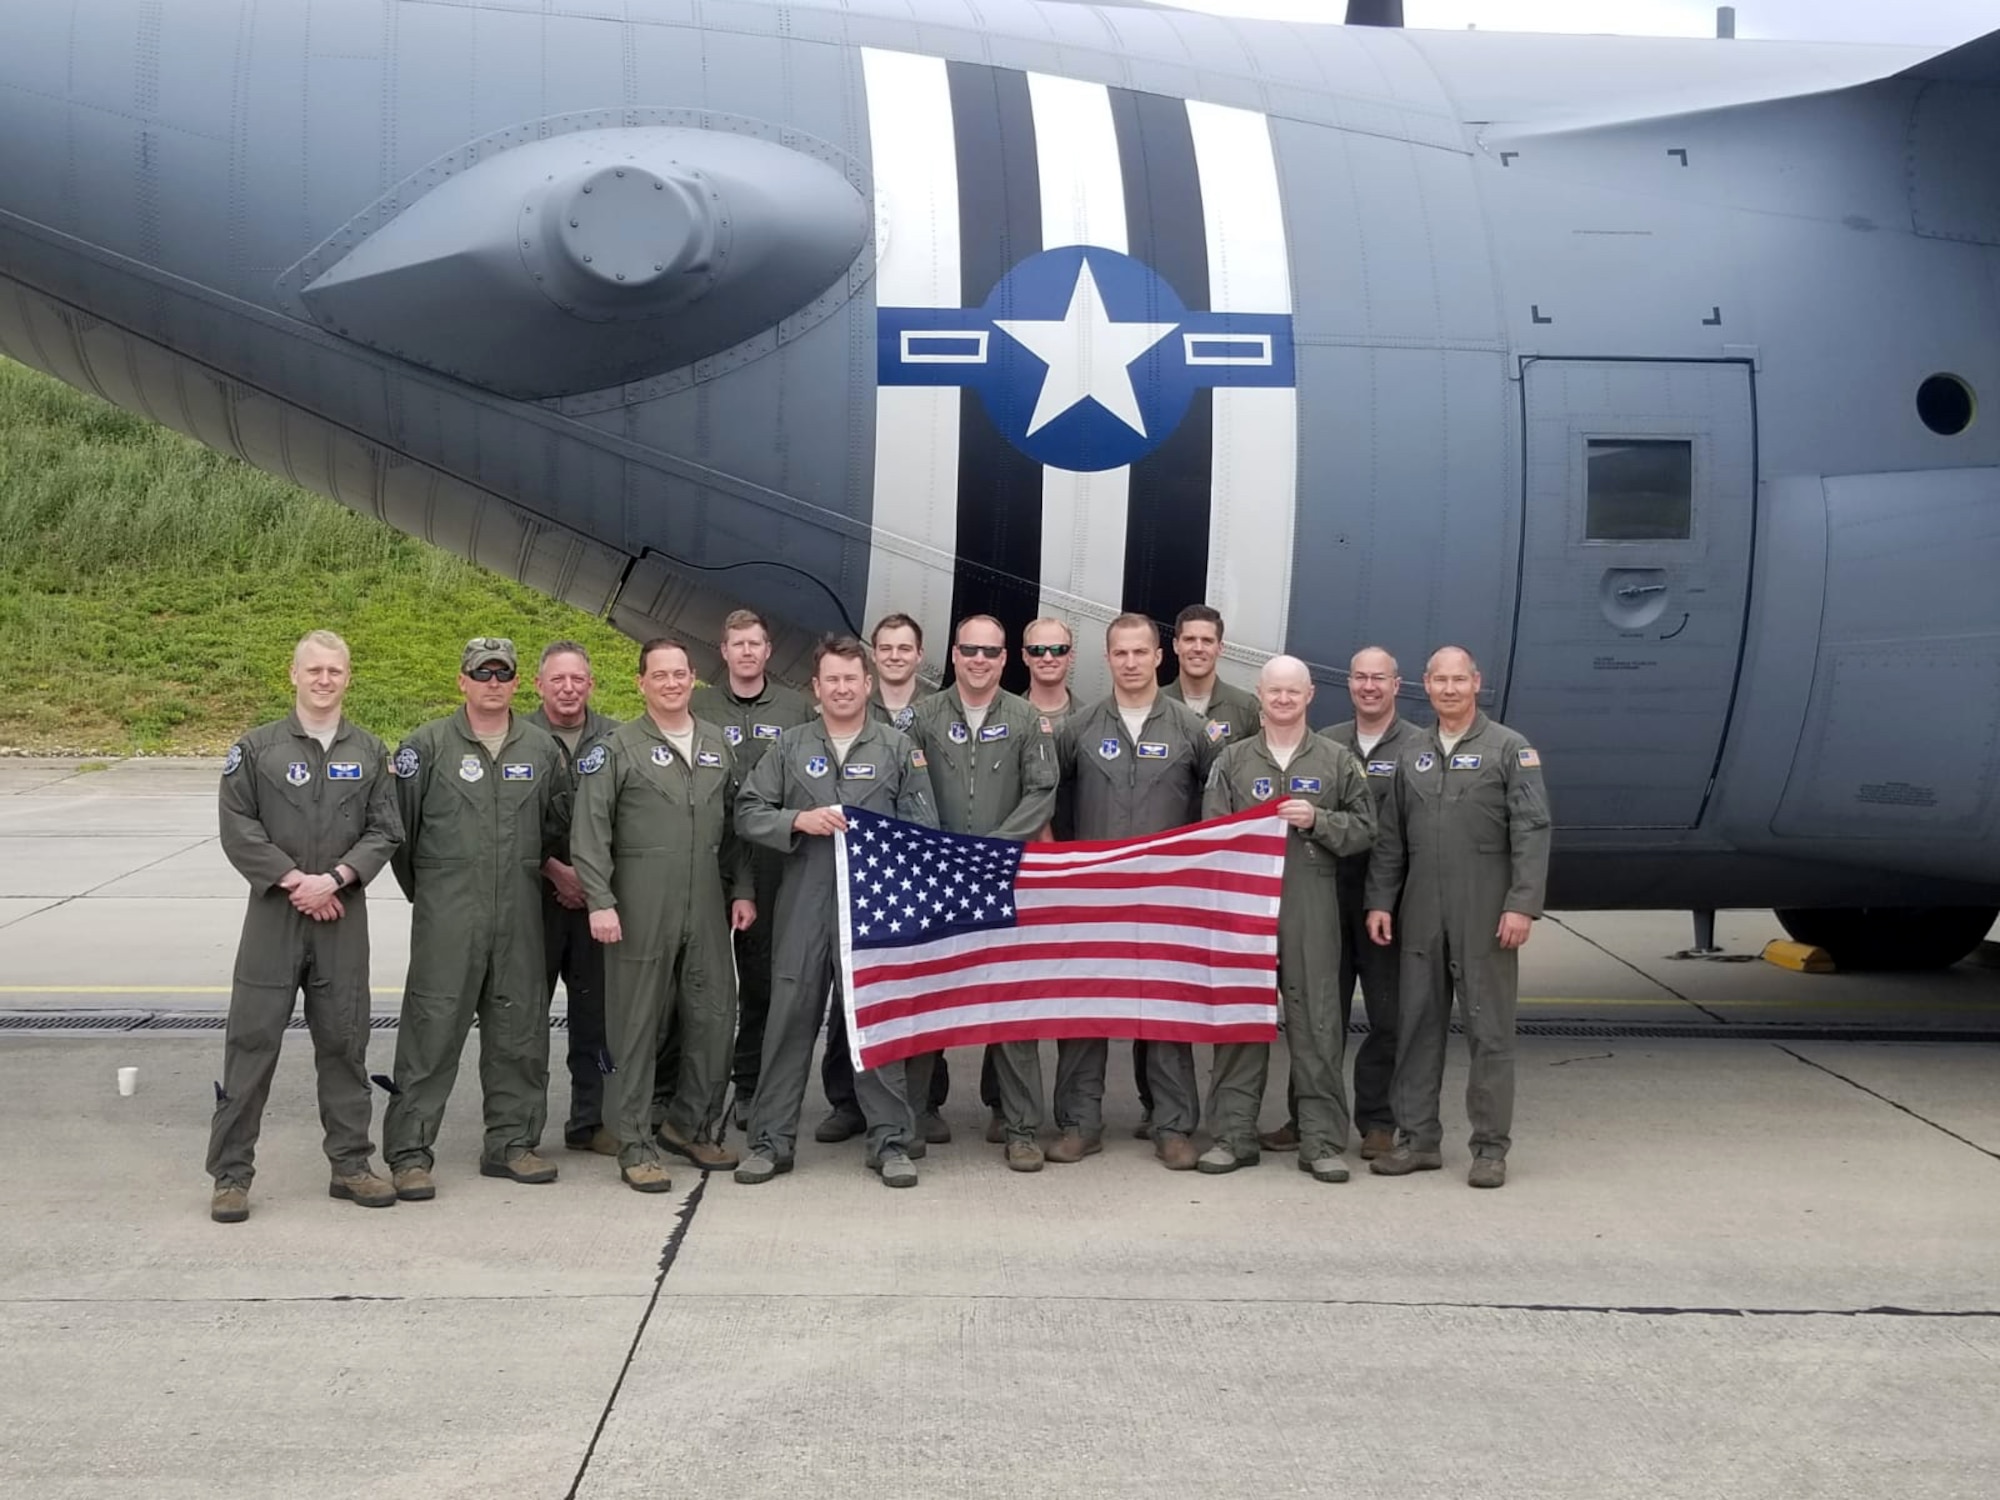 Aircrew from the Kentucky Air National Guard prepare to fly in a historic reenactment of D-Day at Évreux-Fauville Air Base in Évreux, France, June 9, 2019. Two C-130s and more than 30 Airmen from Kentucky’s 123rd Airlift Wing supported the 75th anniversary event, which included the airdrop of nearly 1,000 paratroopers over Normandy, France. The D-Day invasion, formally known as Operation Overlord, turned the tide of World War II in the European theater. (U.S. Air National Guard photo by Lt. Col. Clint Banning)